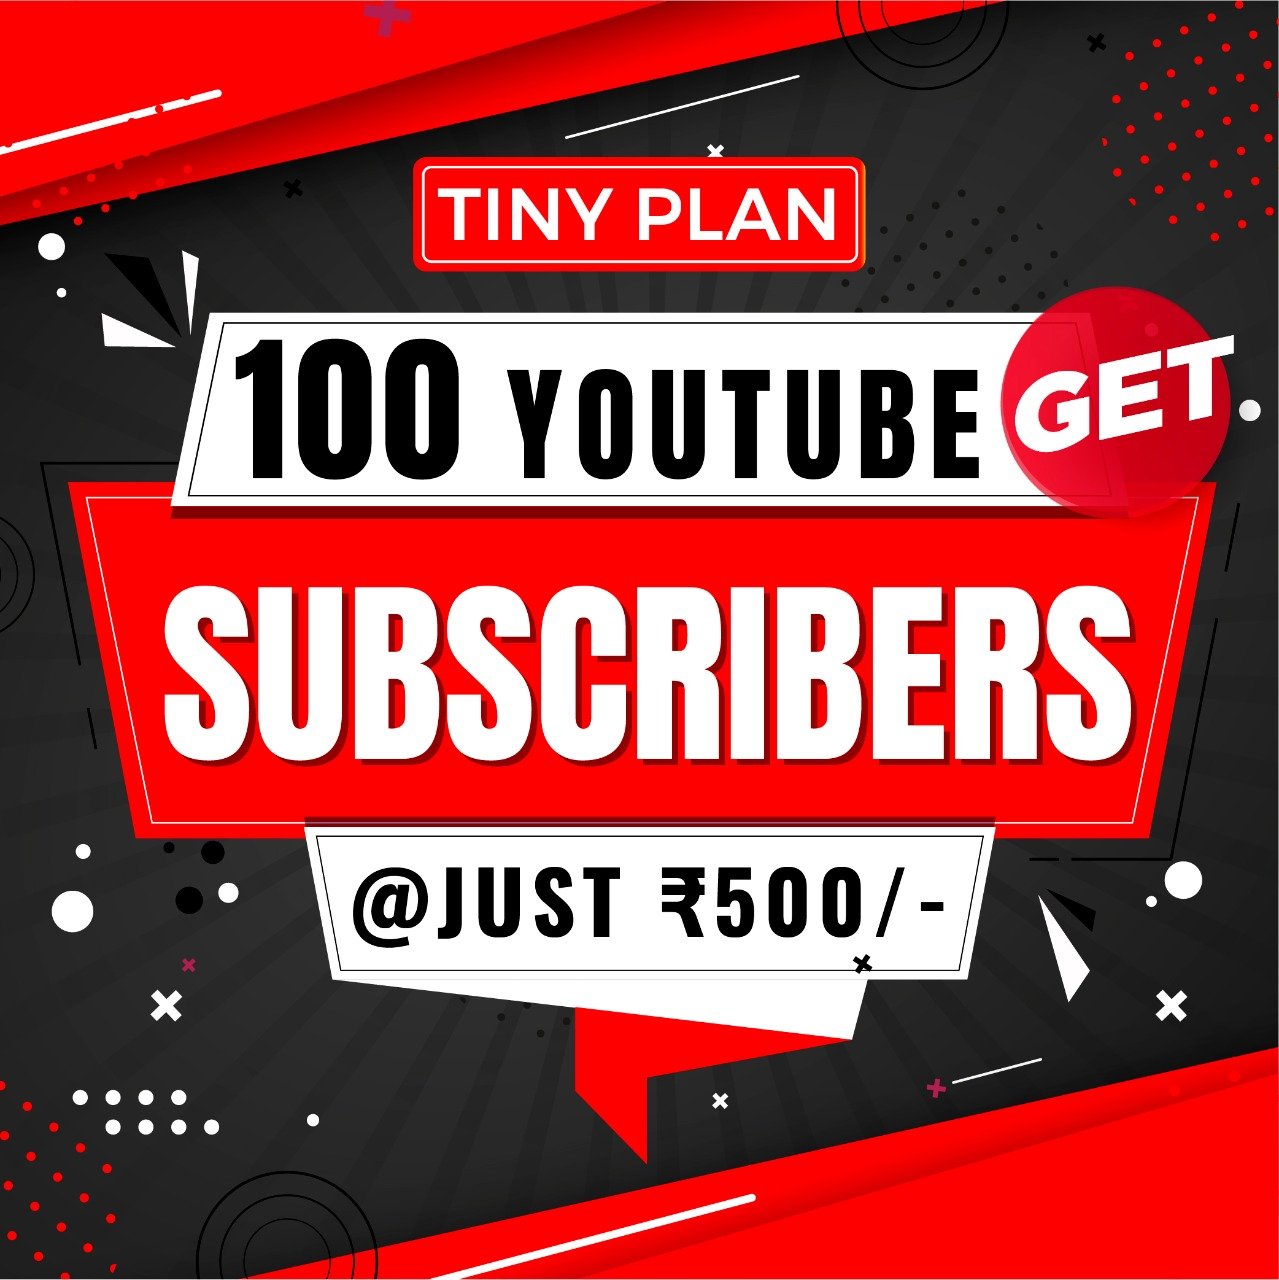 Get 100 YouTube Subscribers